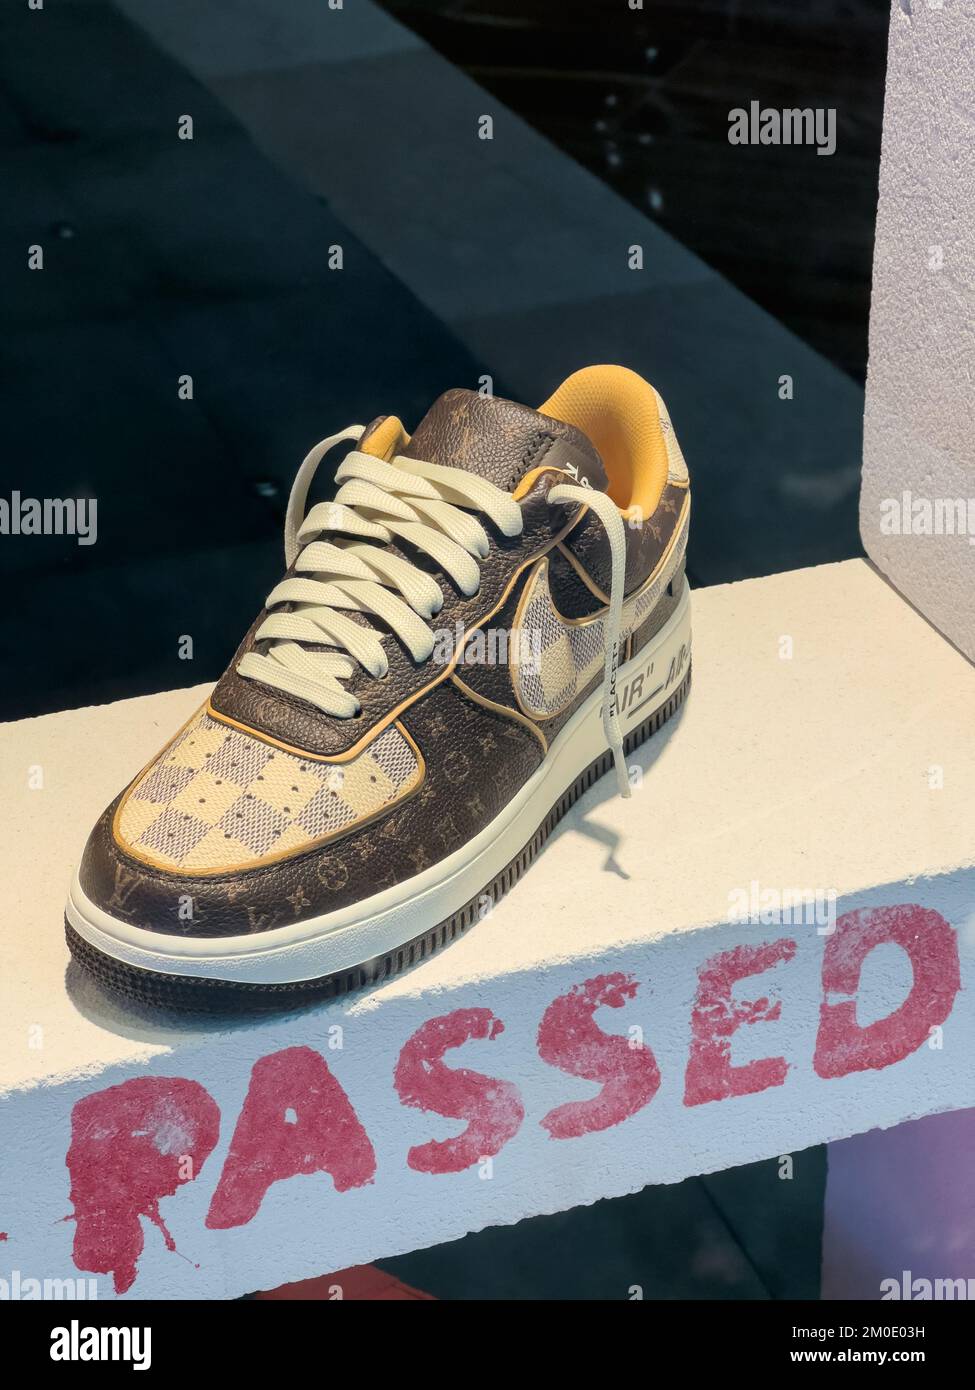 Virgil Abloh, Nike and Louis Vuitton collabation for an Air Force 1 expensive sneakers on display Stock Photo